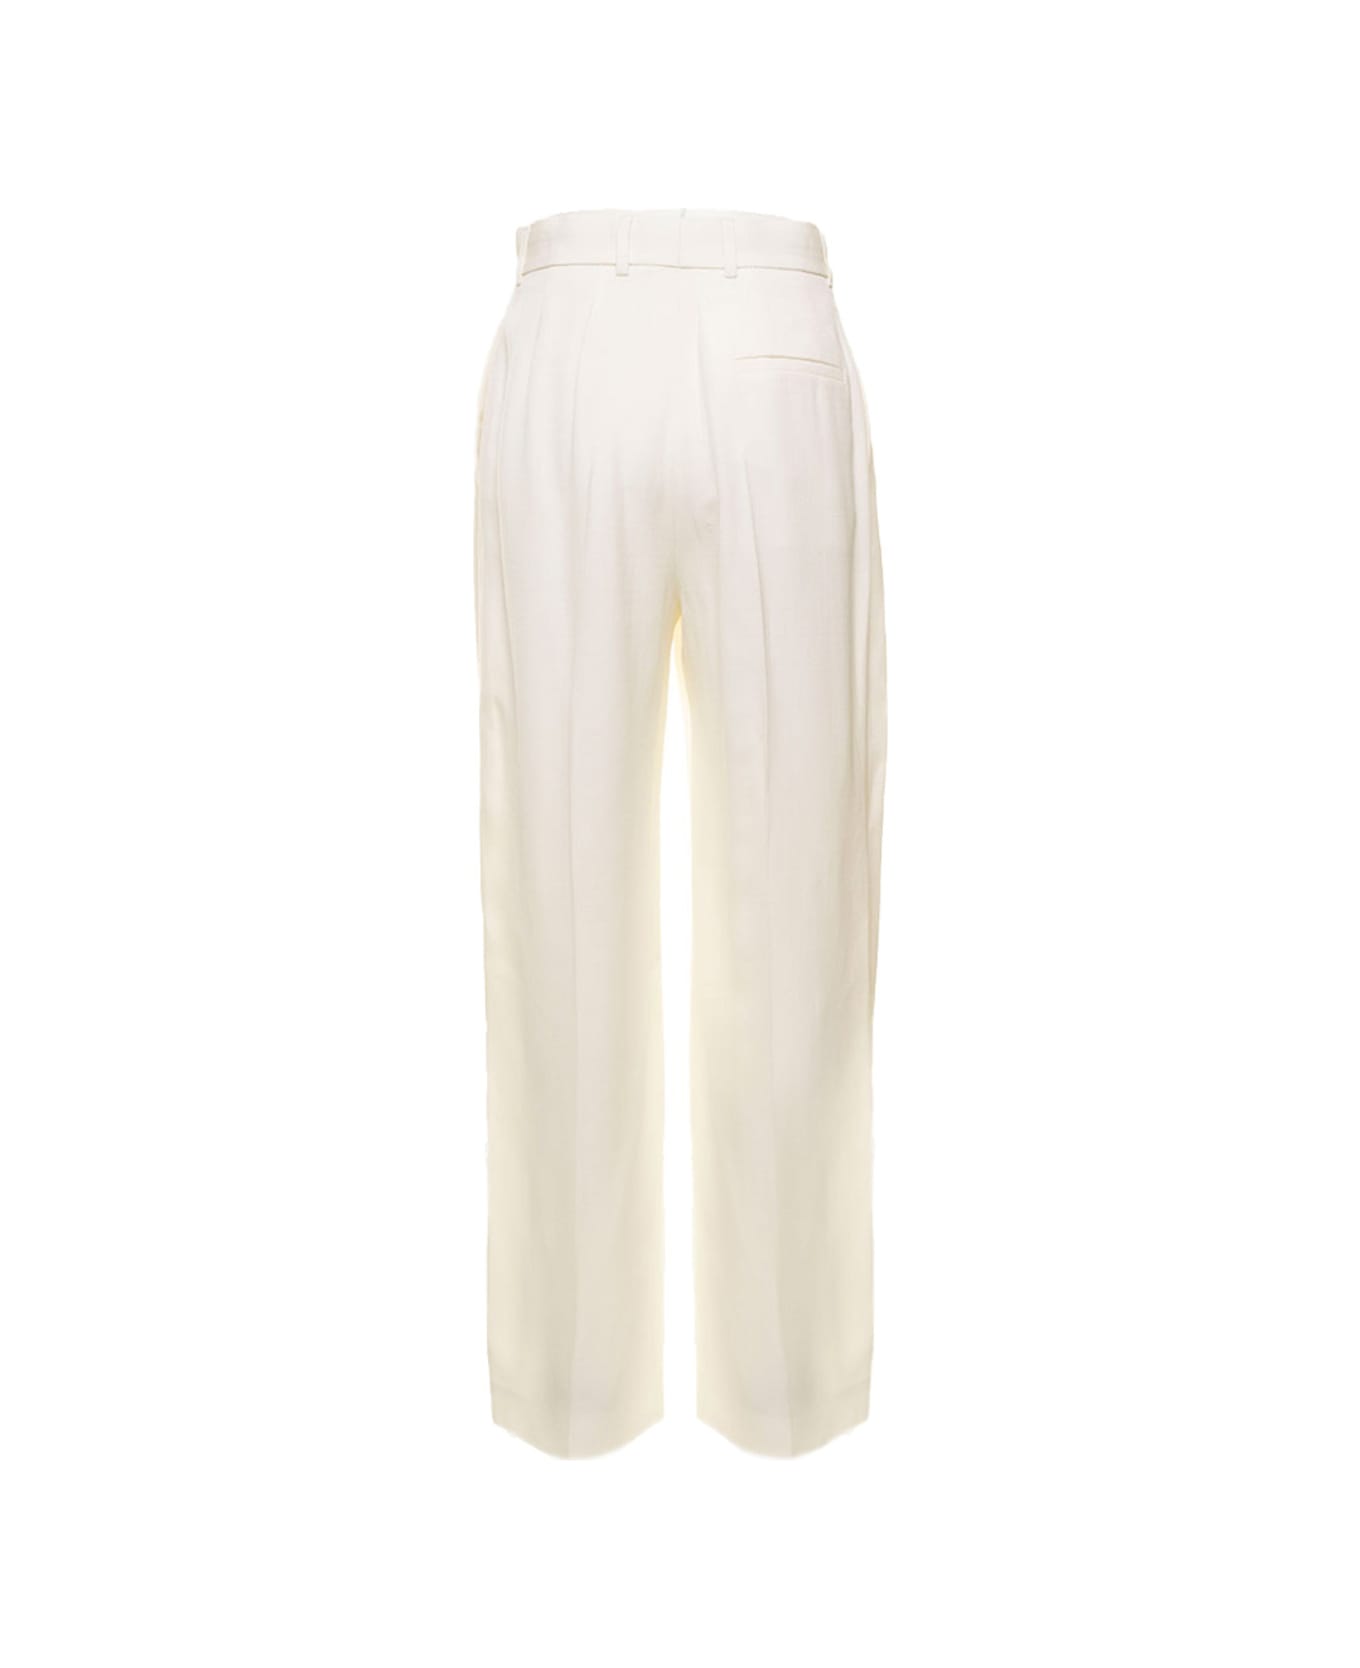 Casablanca White Wide Leg Tailored Trousers In Silk Blend Woman - White ボトムス